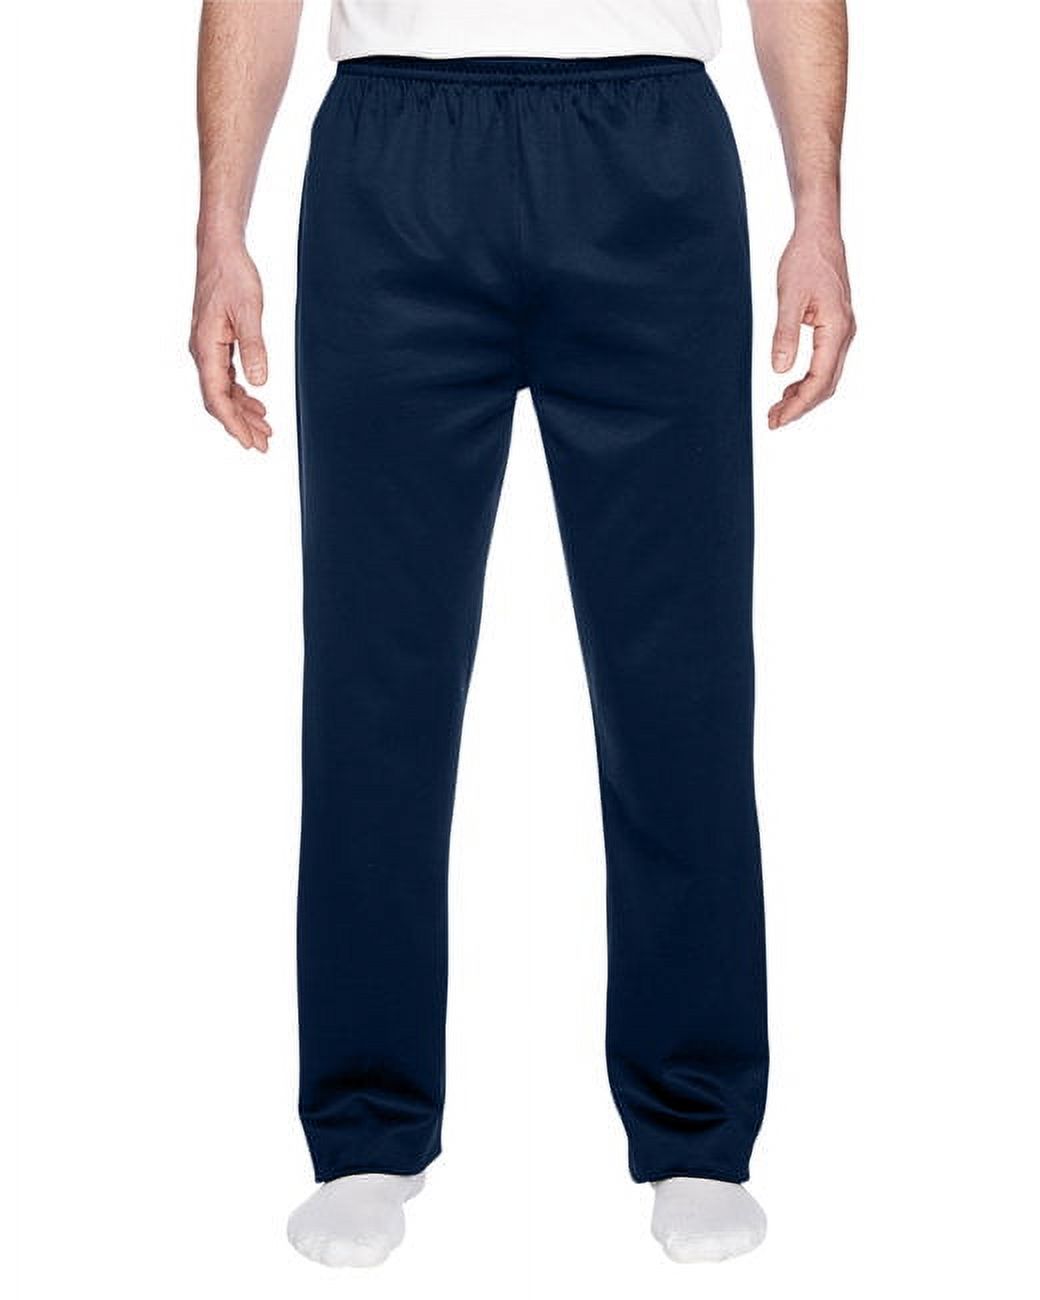 Jerzees PF974MP Adult 6 oz. DRI-POWER SPORT Pocketed Open-Bottom Sweatpant - image 1 of 3